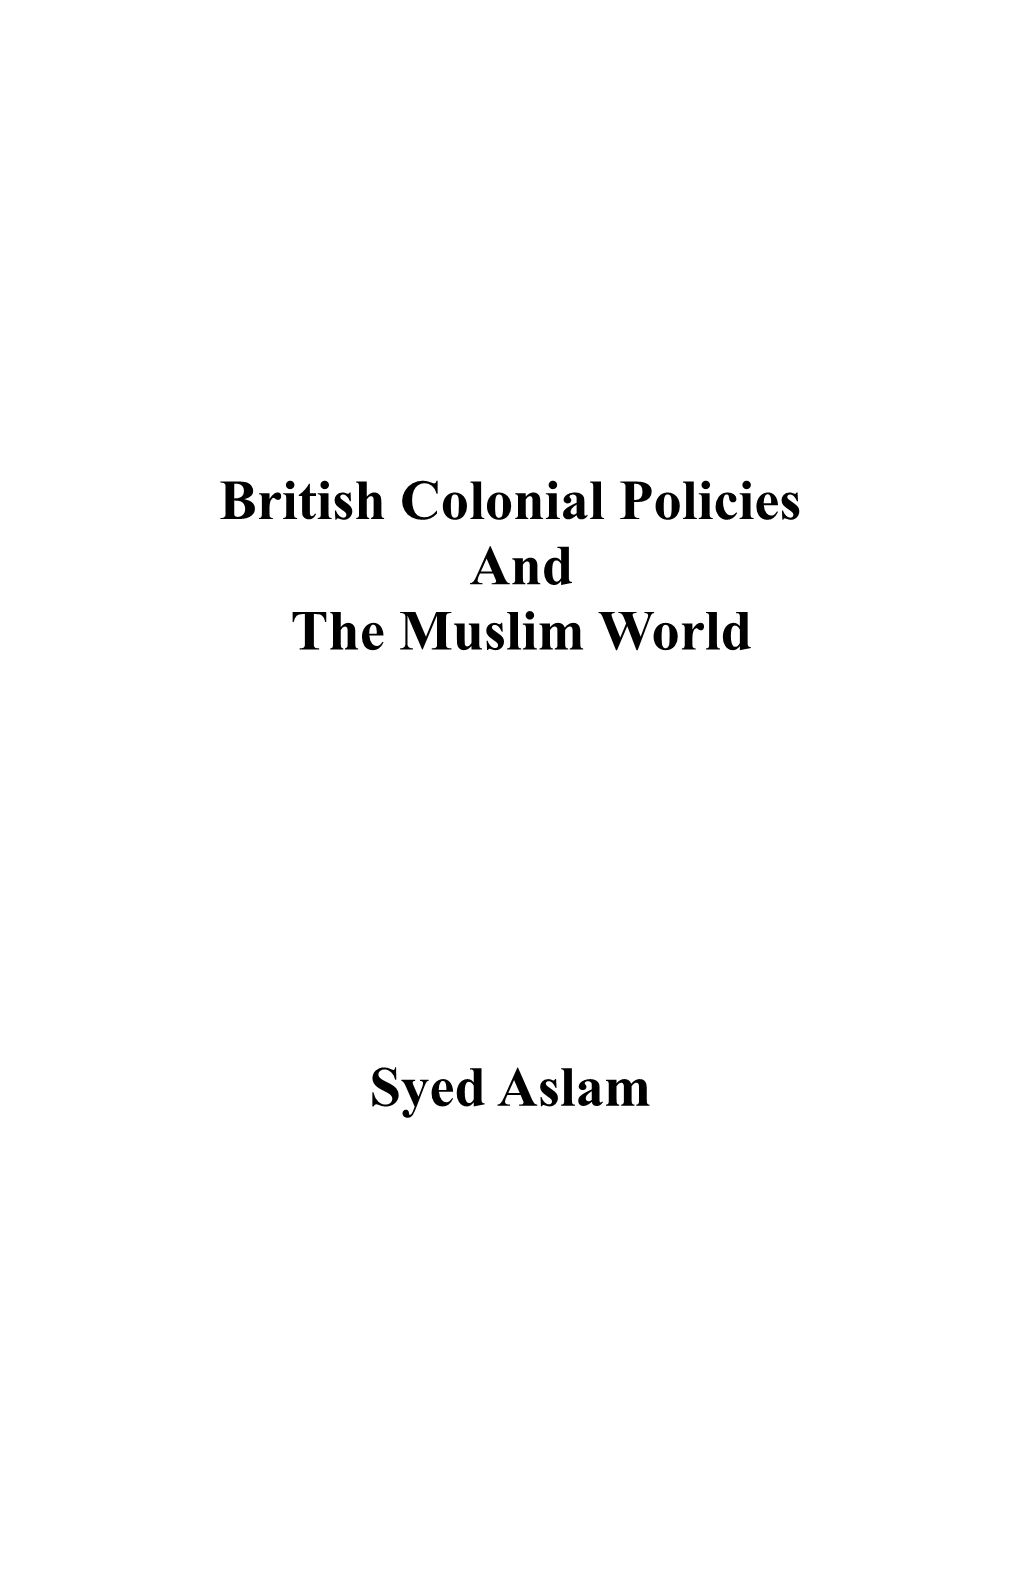 British Colonial Policies and the Muslim World